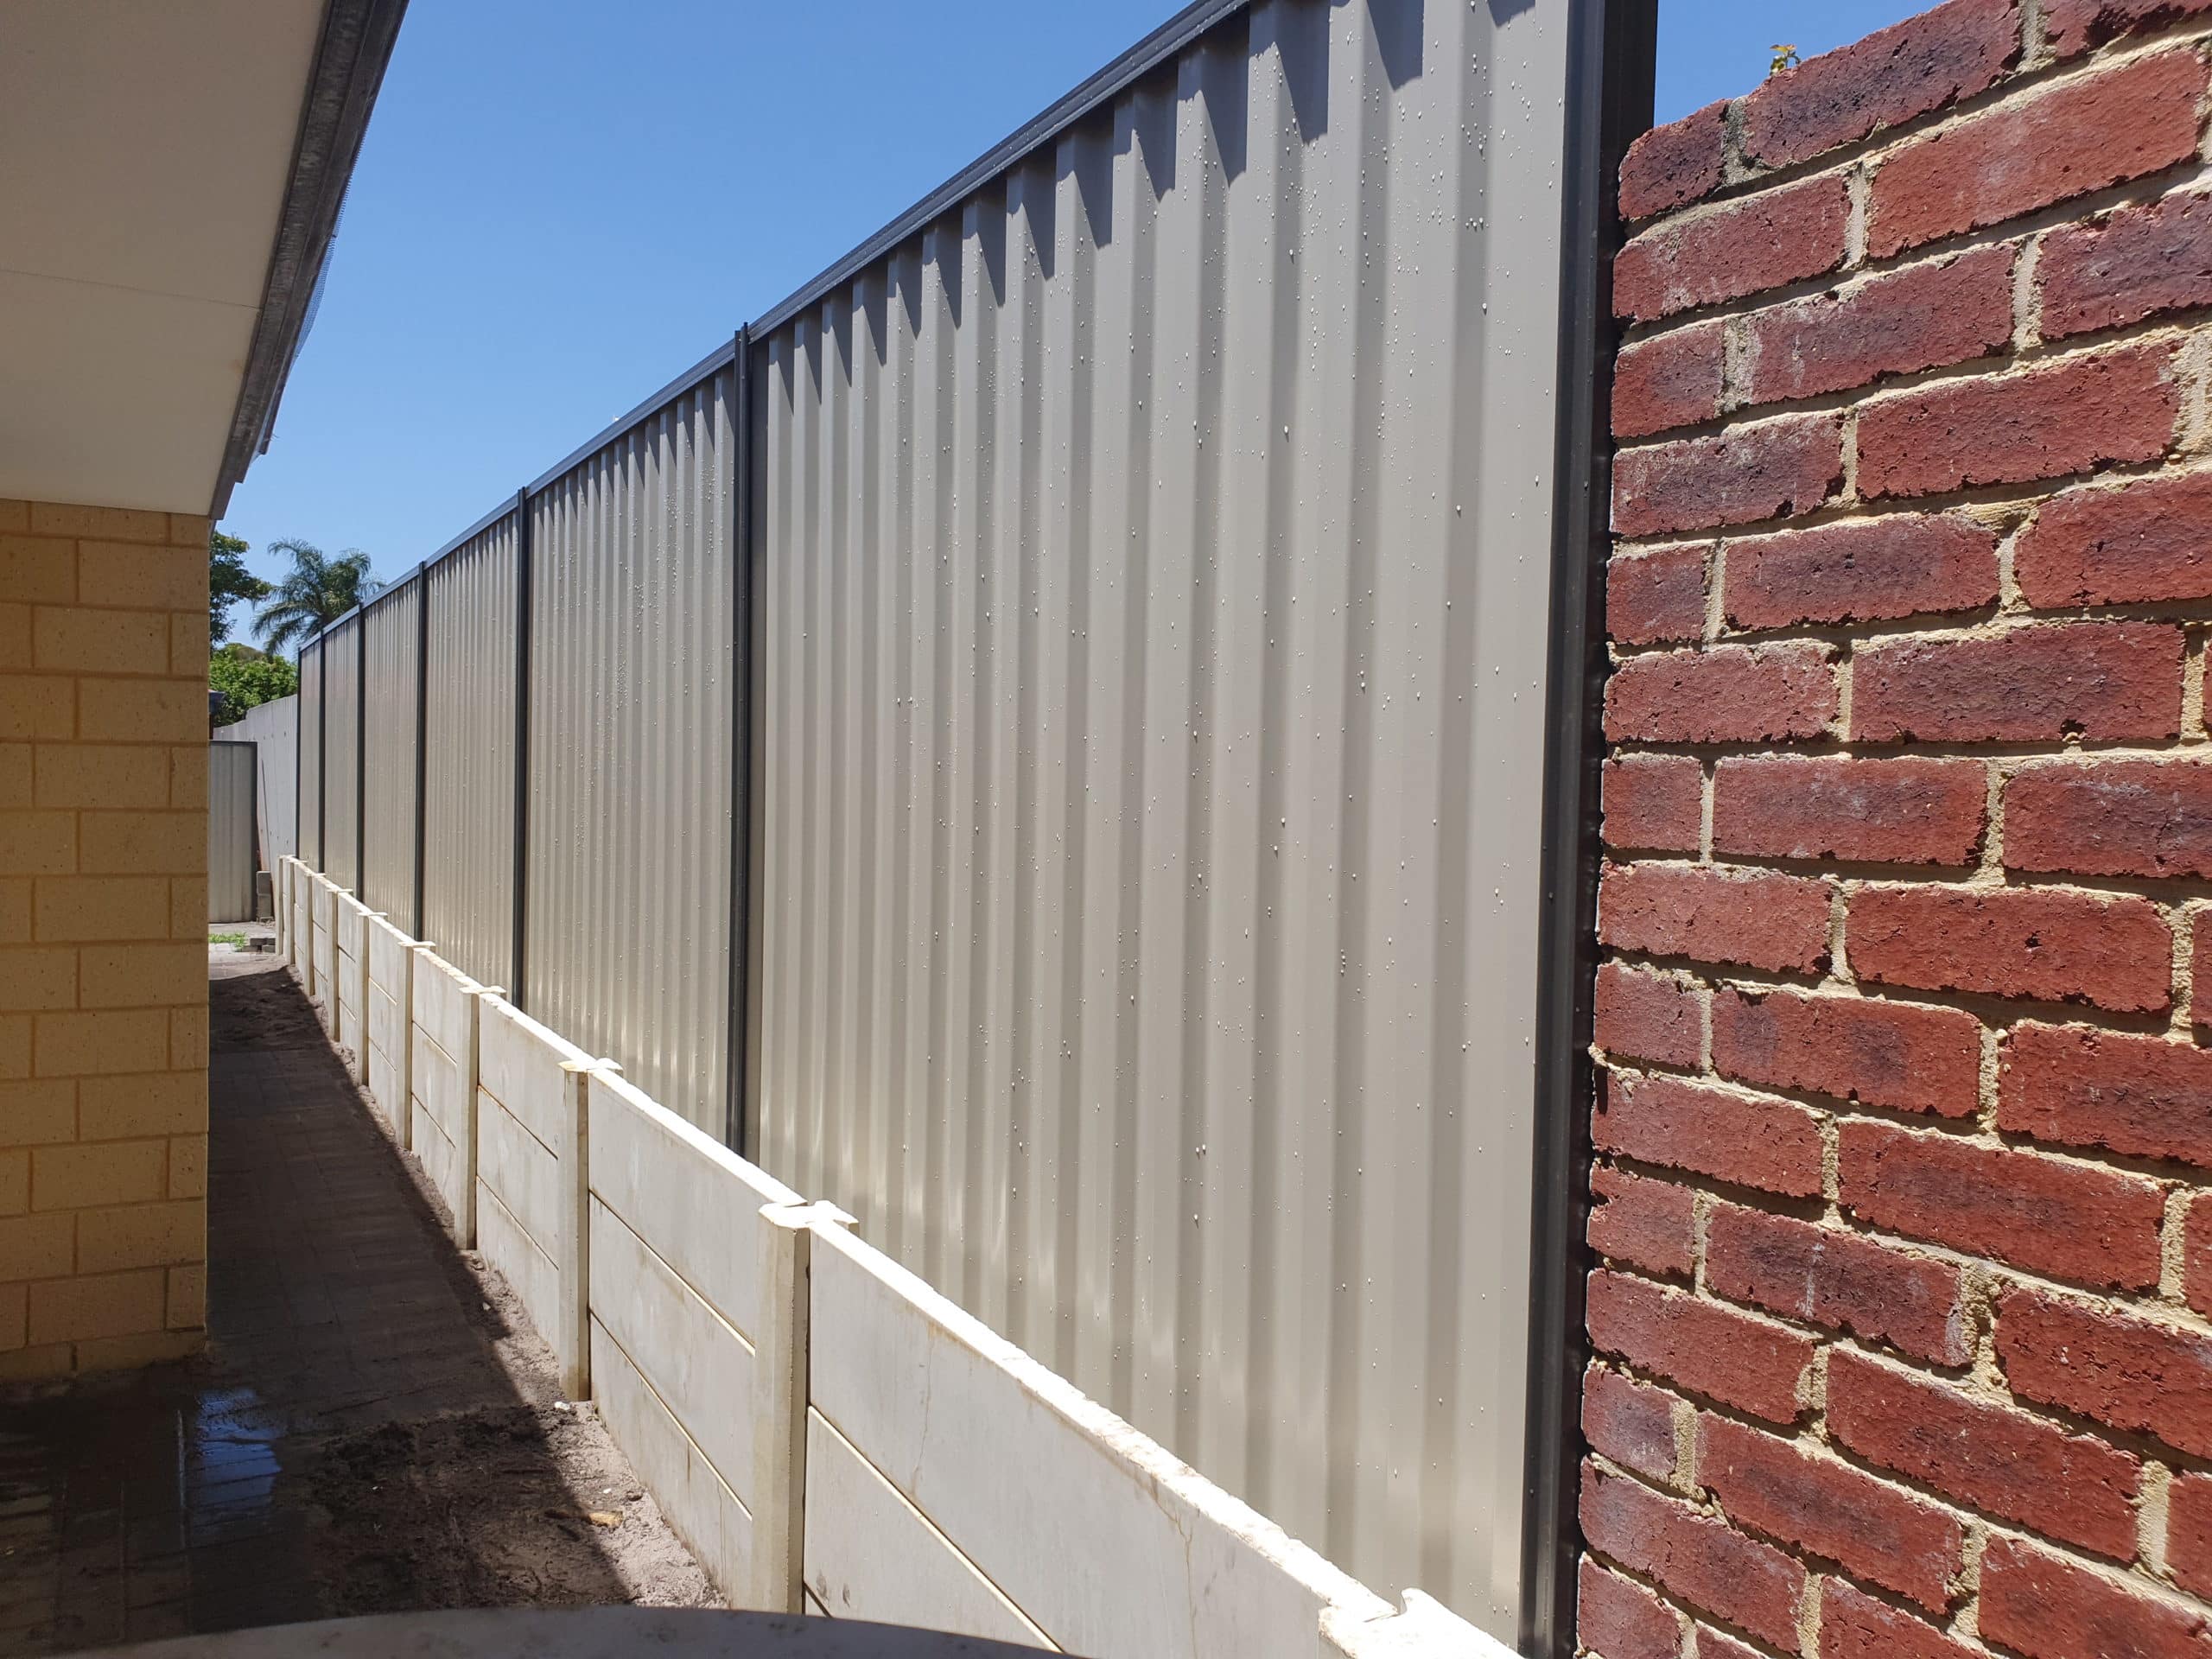 Colorbond fence installation on a retaining wall in Perth, providing a practical and attractive solution for defining property boundaries and retaining soil. The Colorbond fence panels are installed on top of a sturdy retaining wall, creating a solid barrier for privacy and security. The fence comes in a range of colors to match the surrounding landscape or house exterior and is known for its durability and low maintenance. The fence installation team can customize the design and height of the fence to meet the specific needs and preferences of the property owner, ensuring a functional and stylish addition to the property